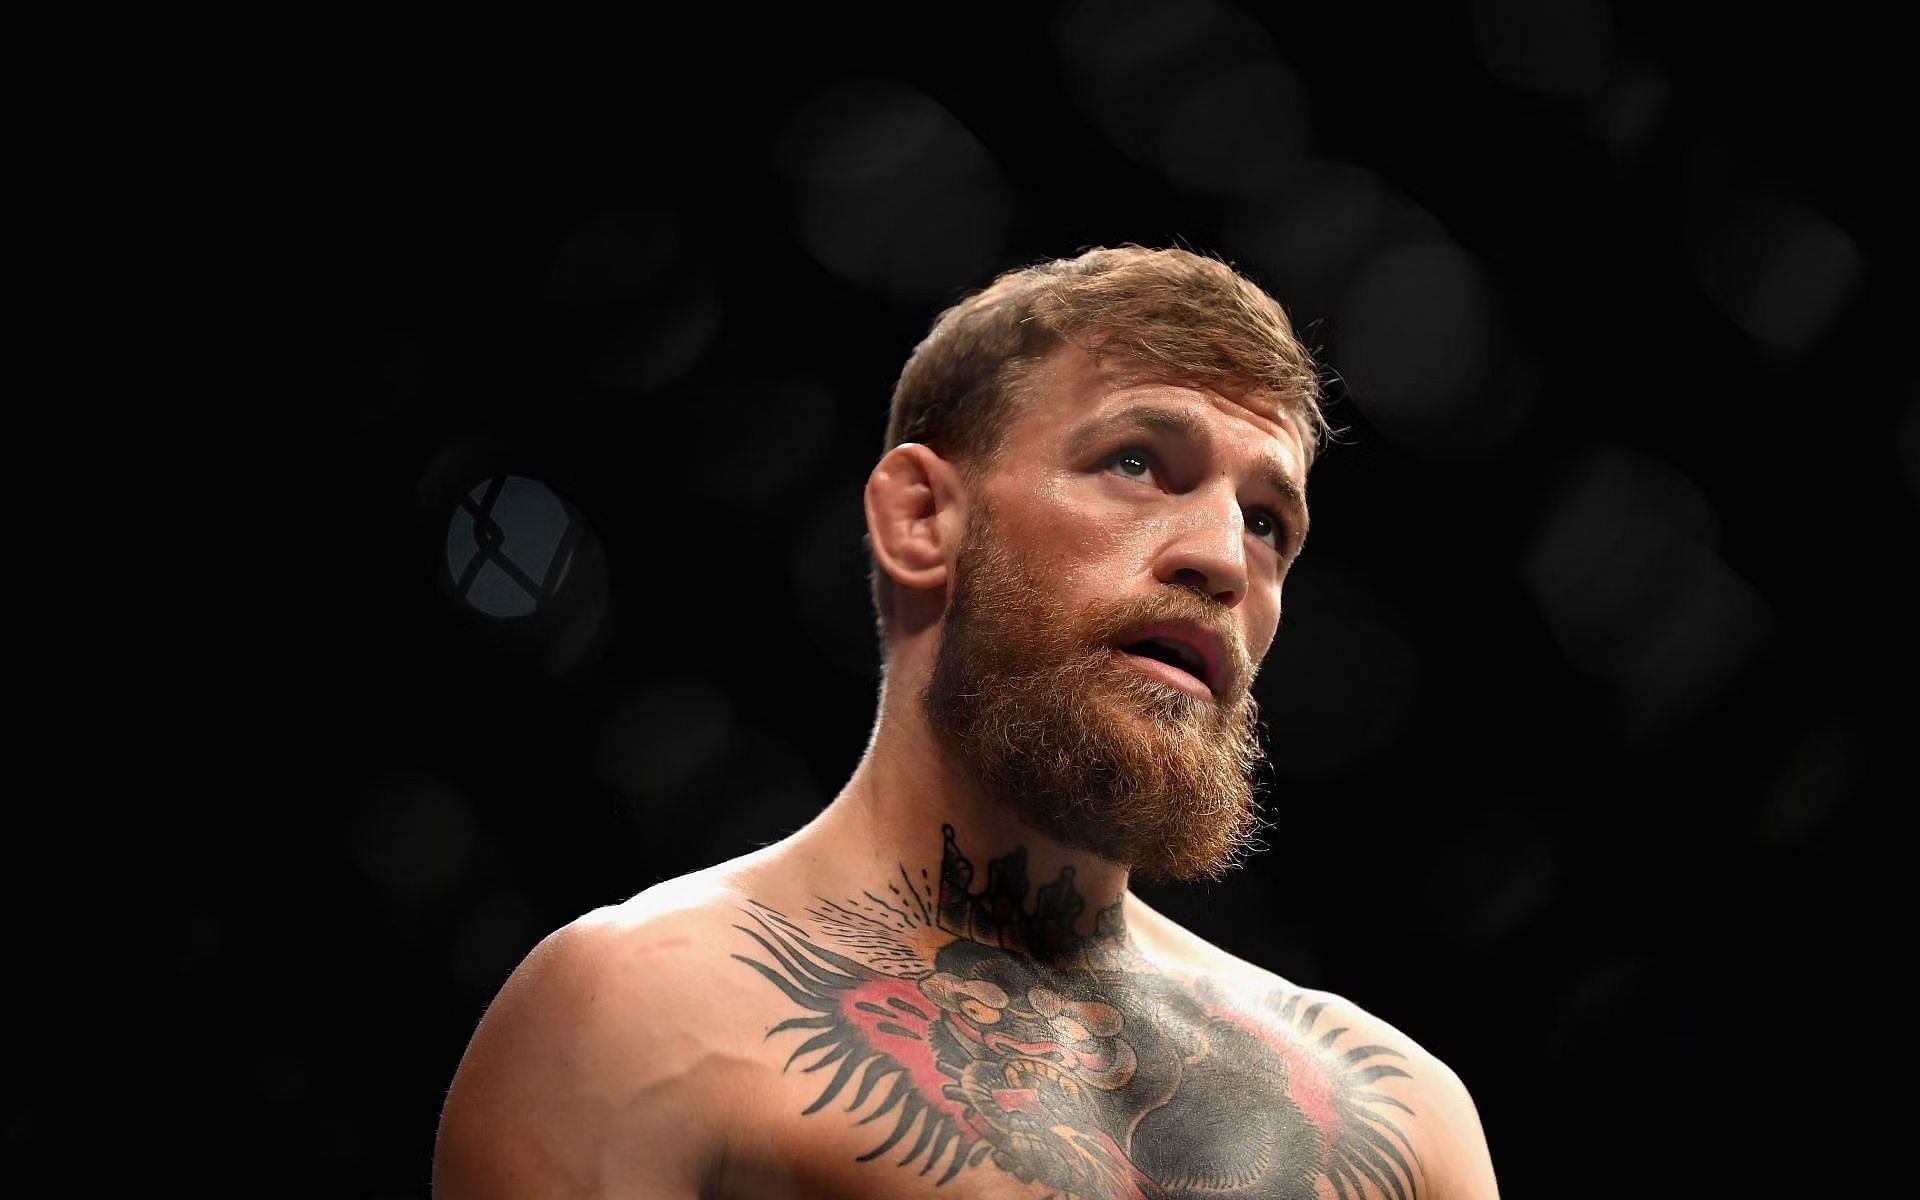 Conor McGregor is set to coach TUF again - eight years after his first time on the reality show